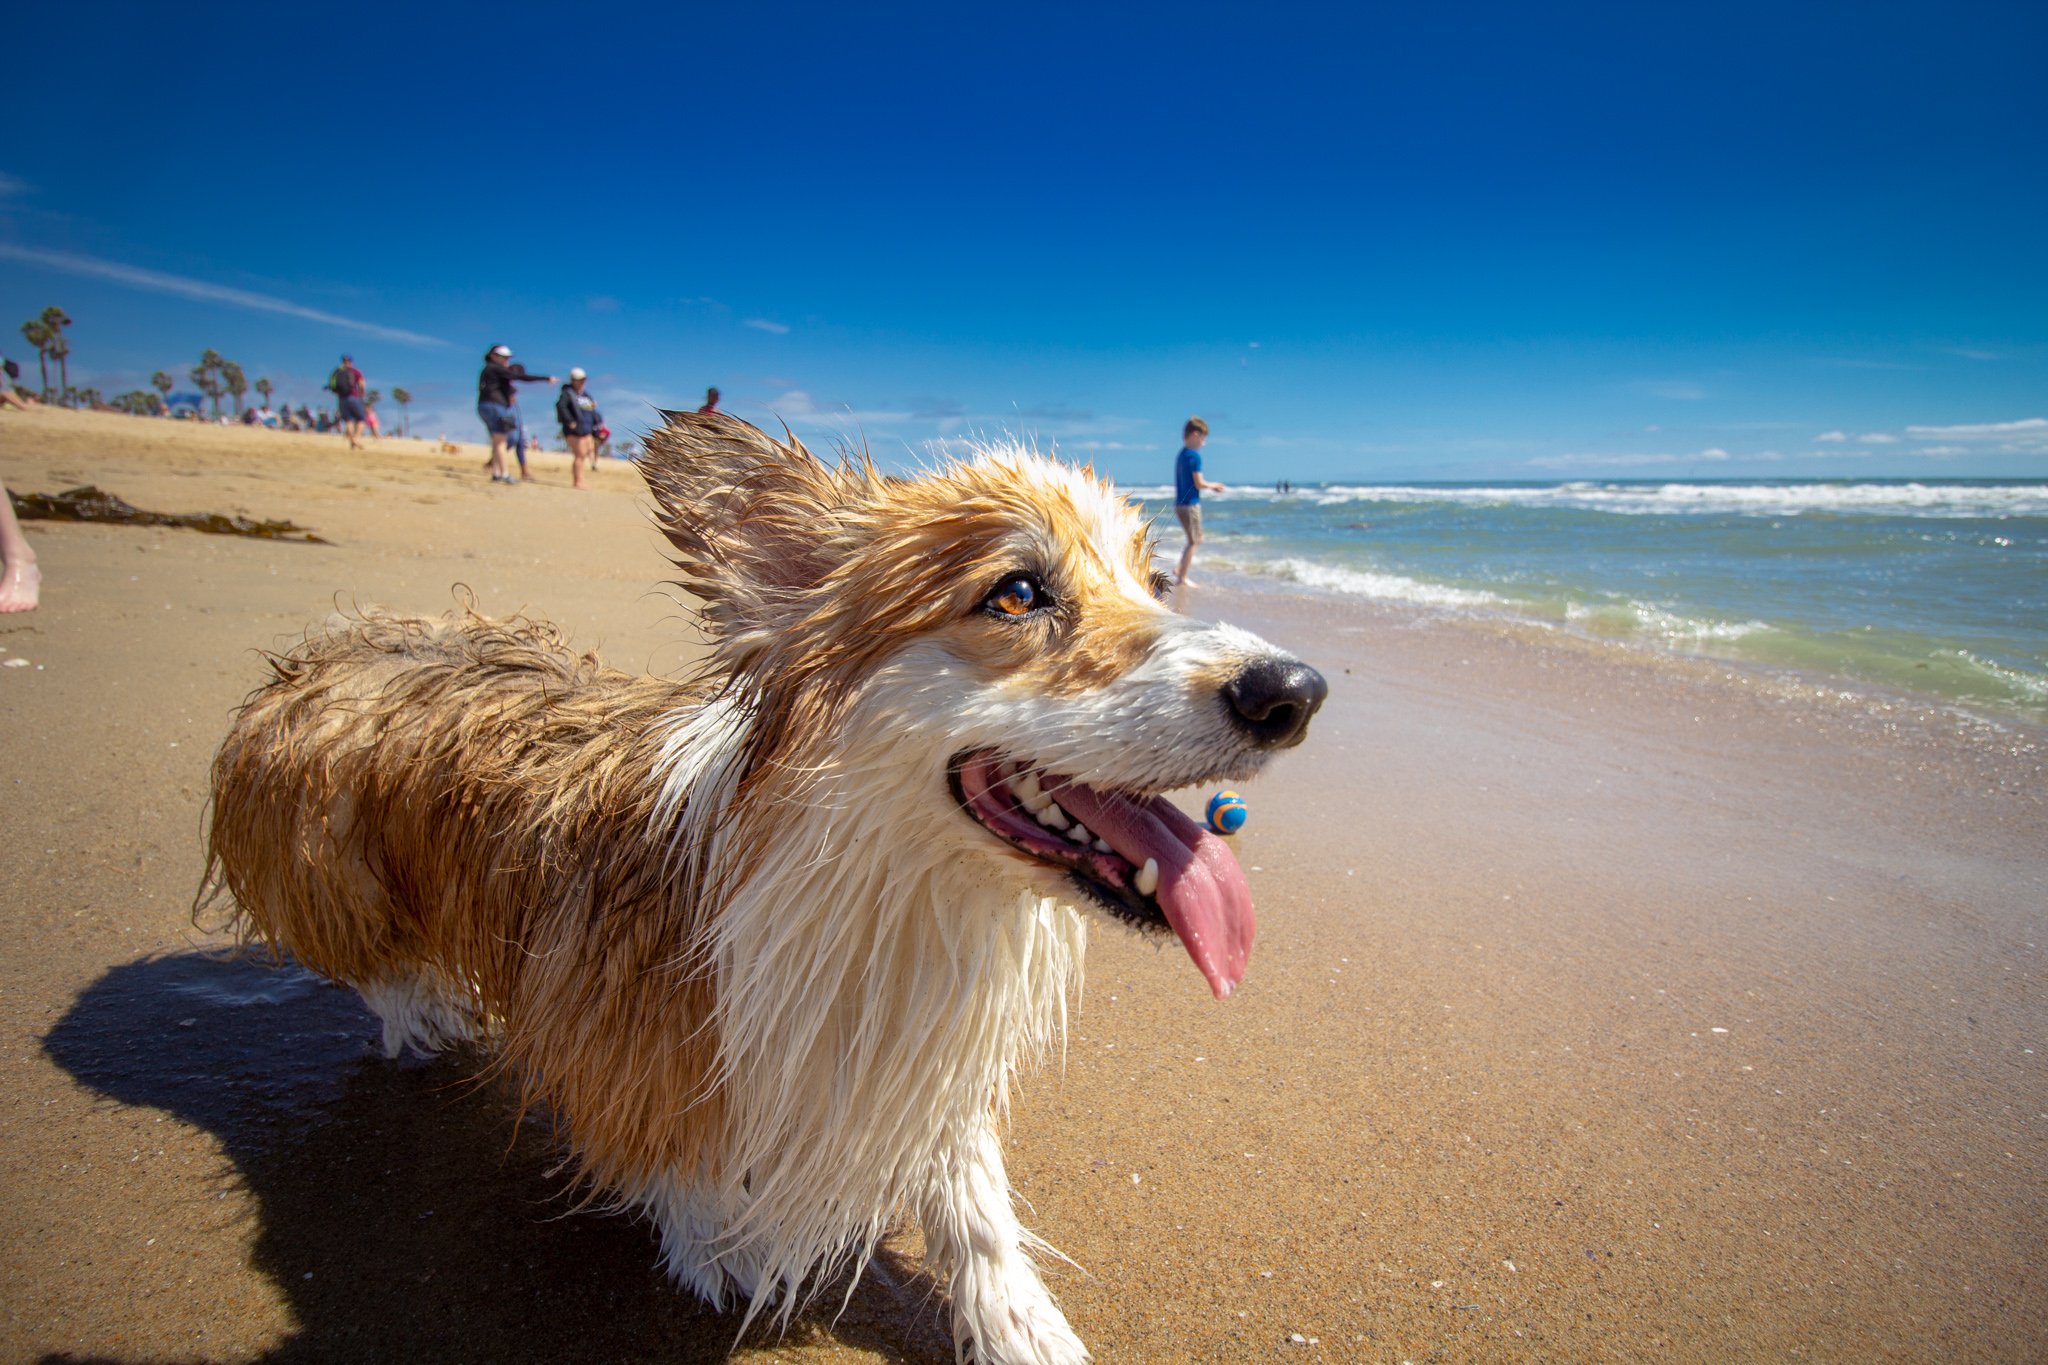 Orange County Pet and Dog Photography - by Steamer Lee - Corgi Beach Day Spring 2019 - Southern Caliornia 58 (1).JPG